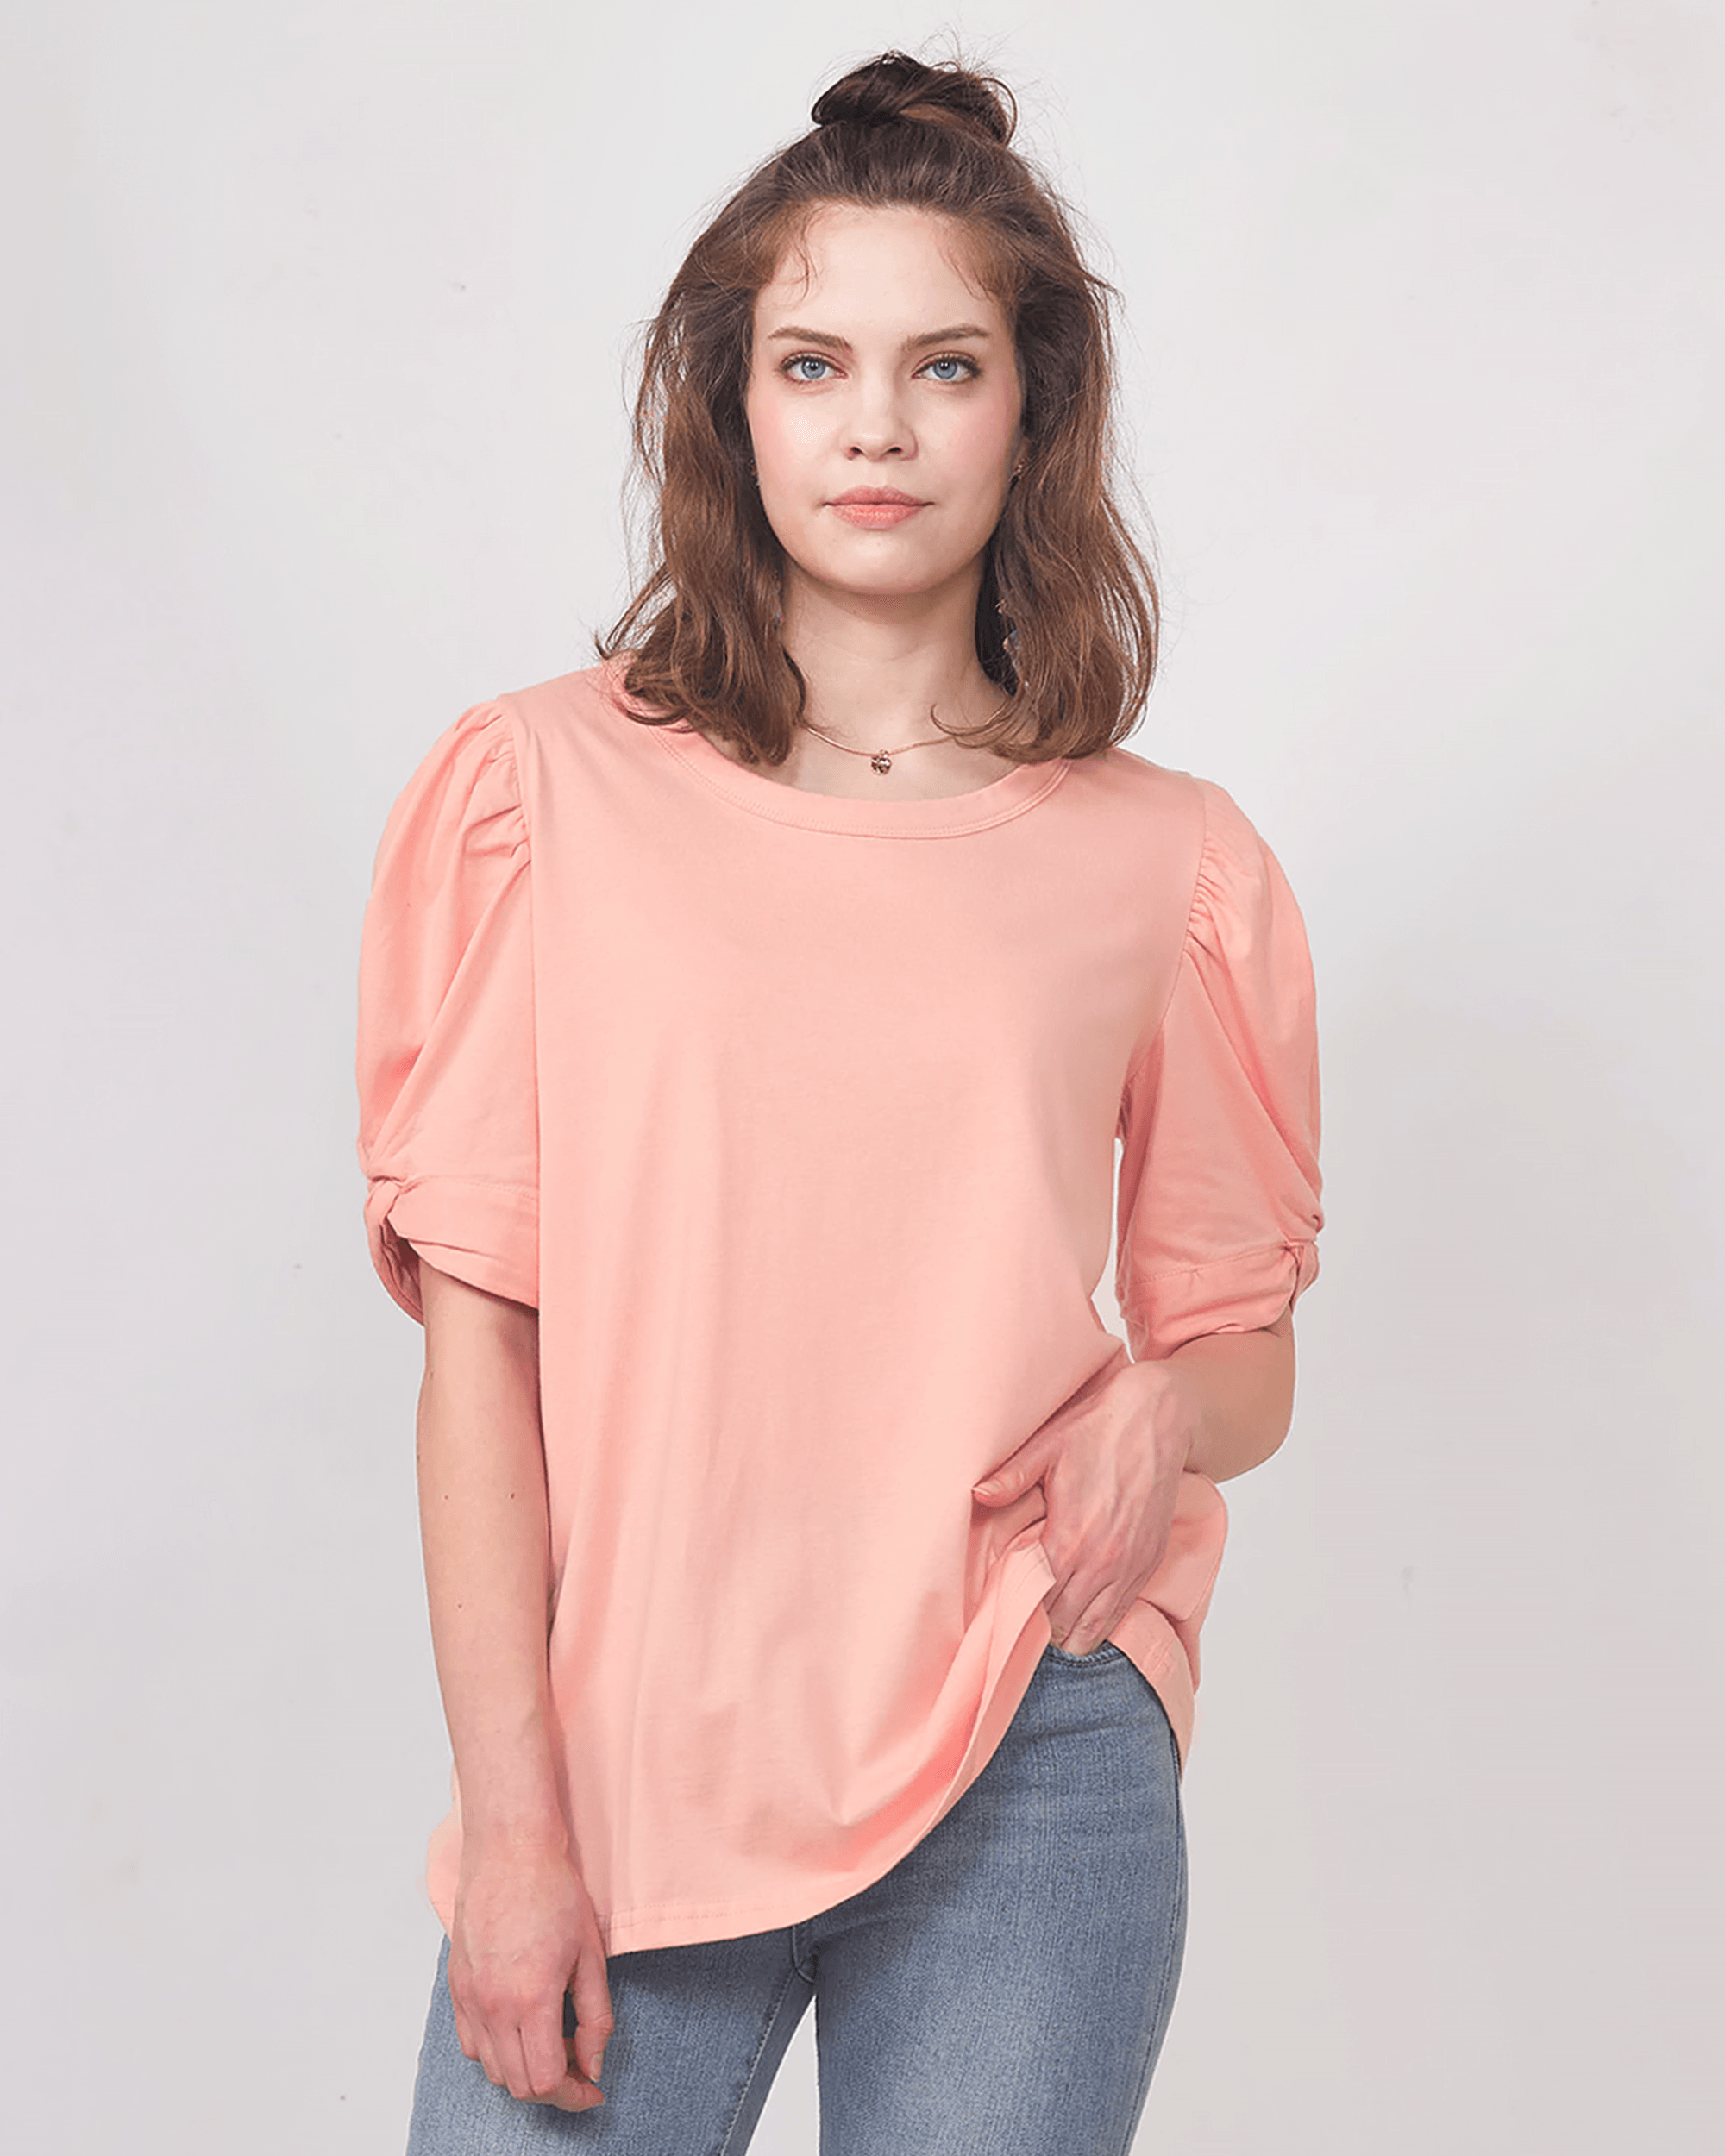 Knotted Puff Sleeve Top - Orange Peach